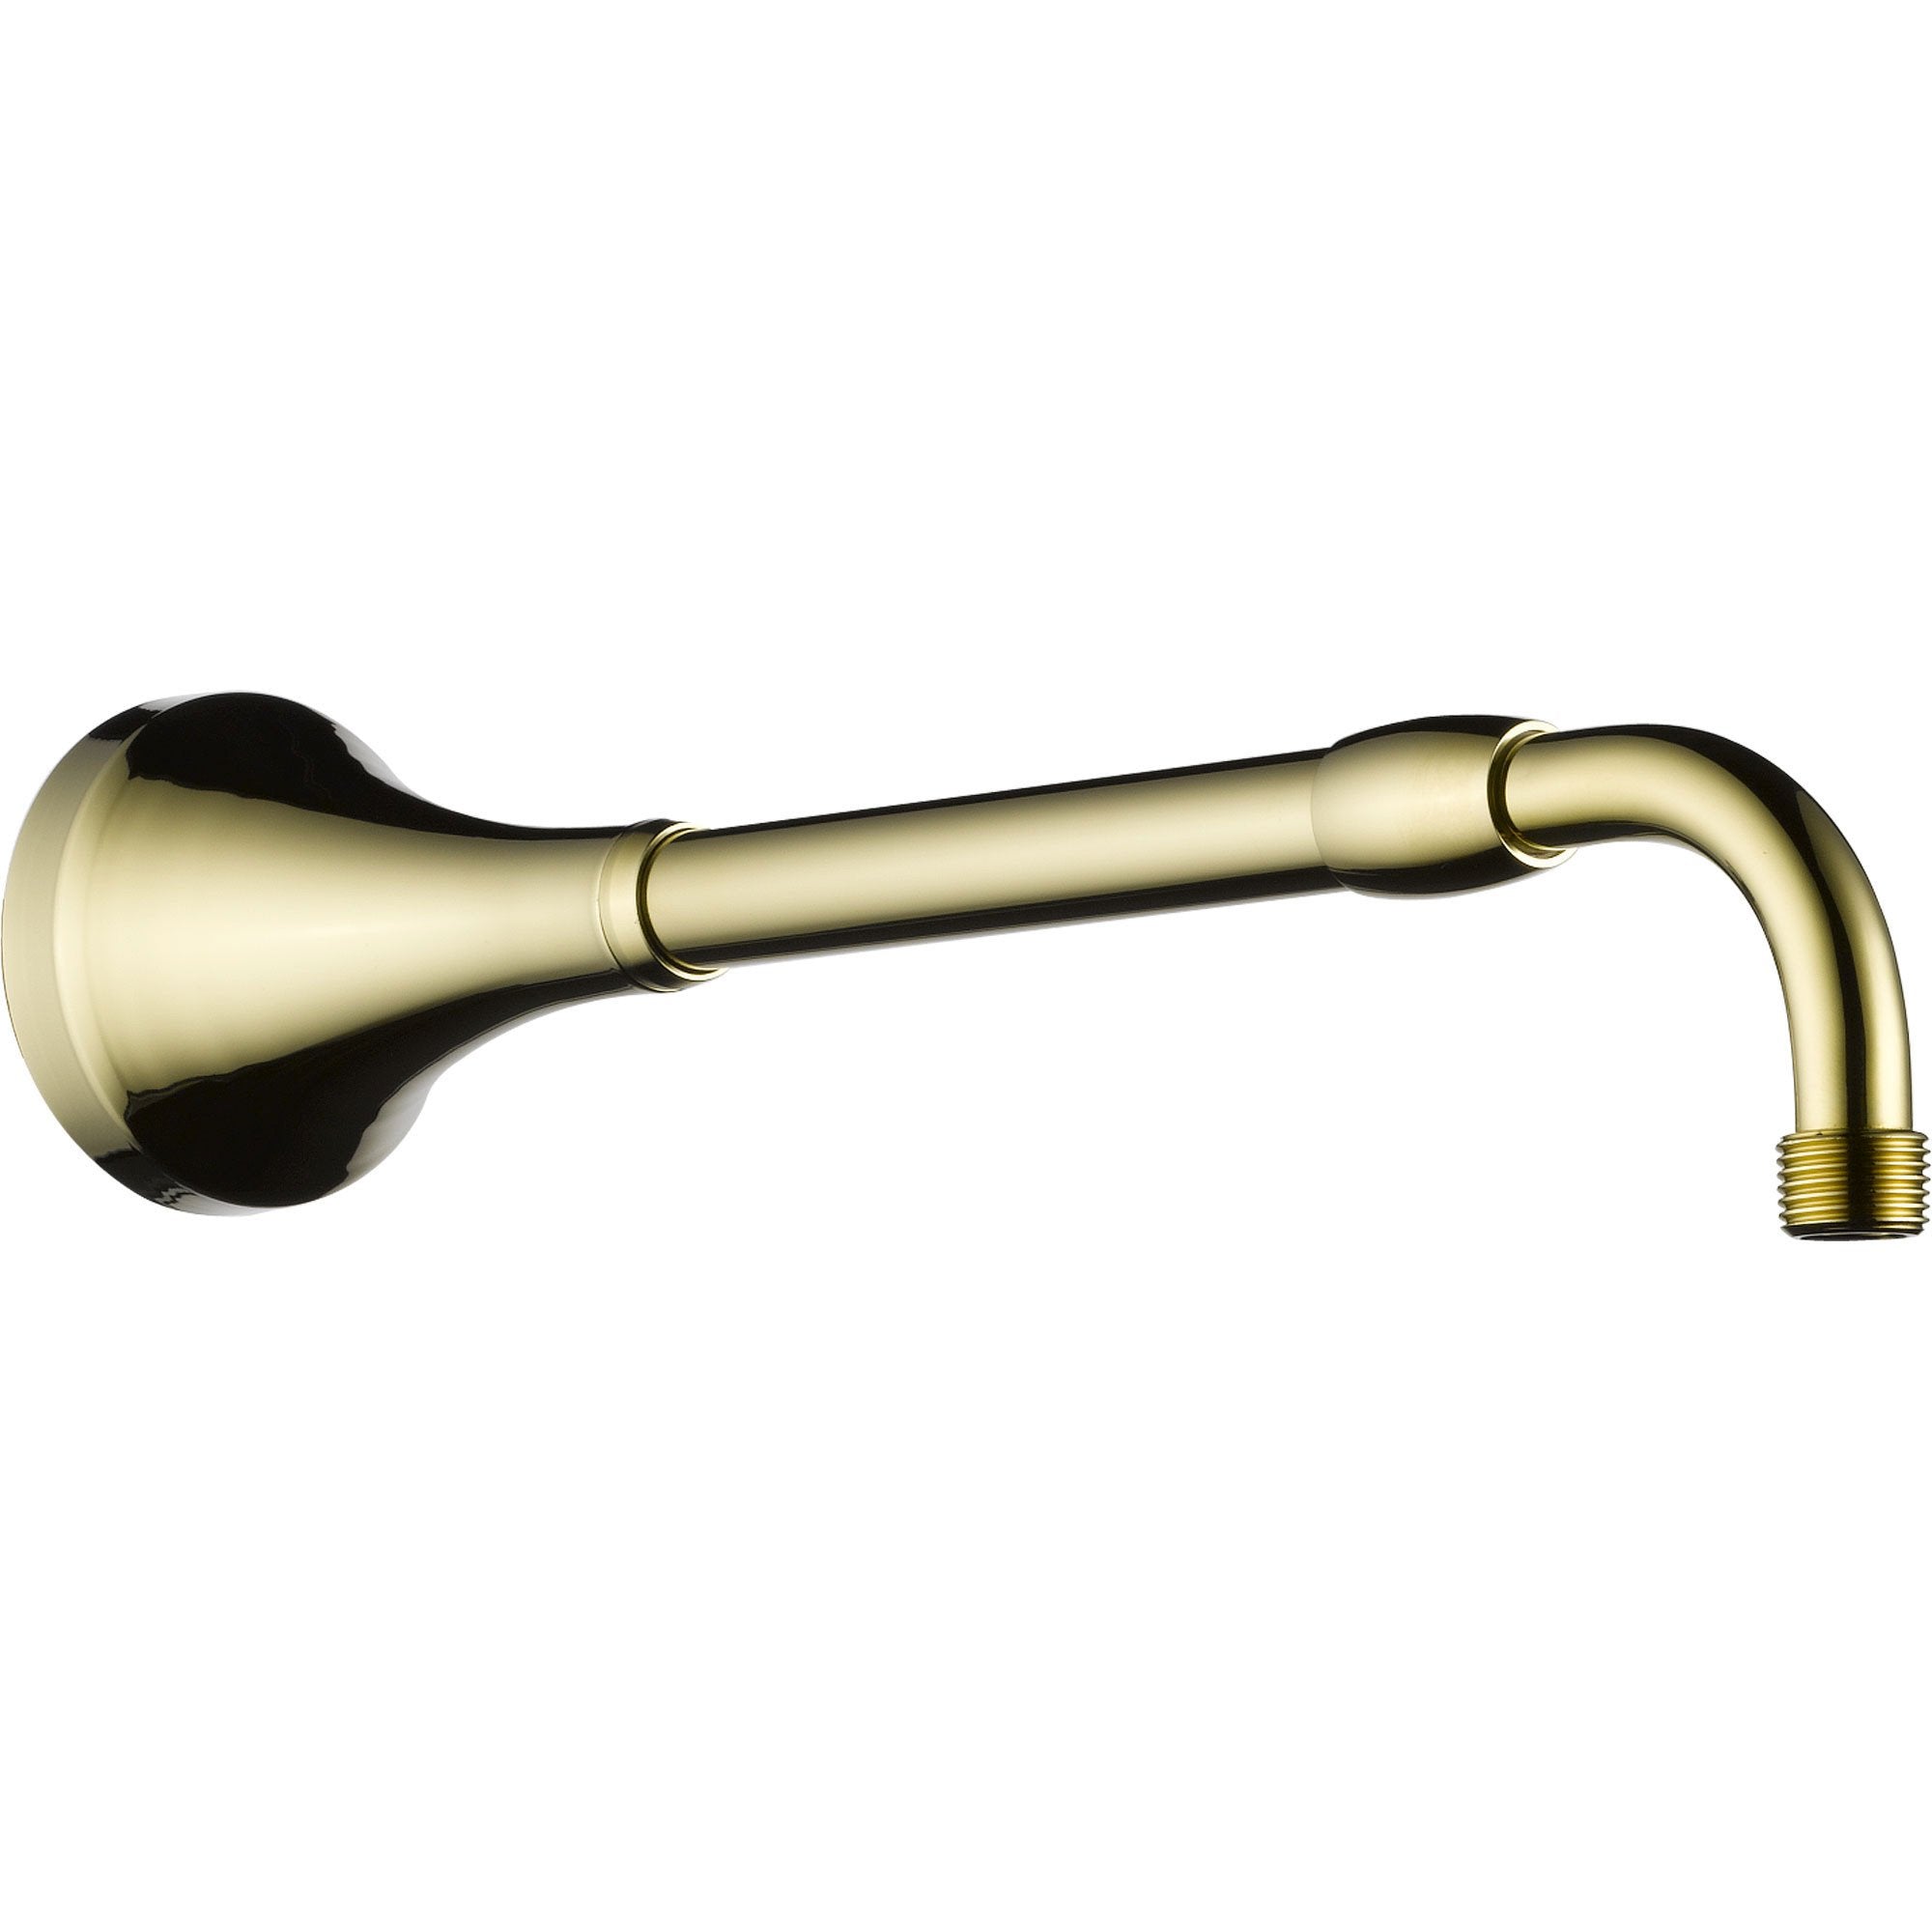 Delta Extendable 13 - 22 inch Shower Arm in Polished Brass 563303